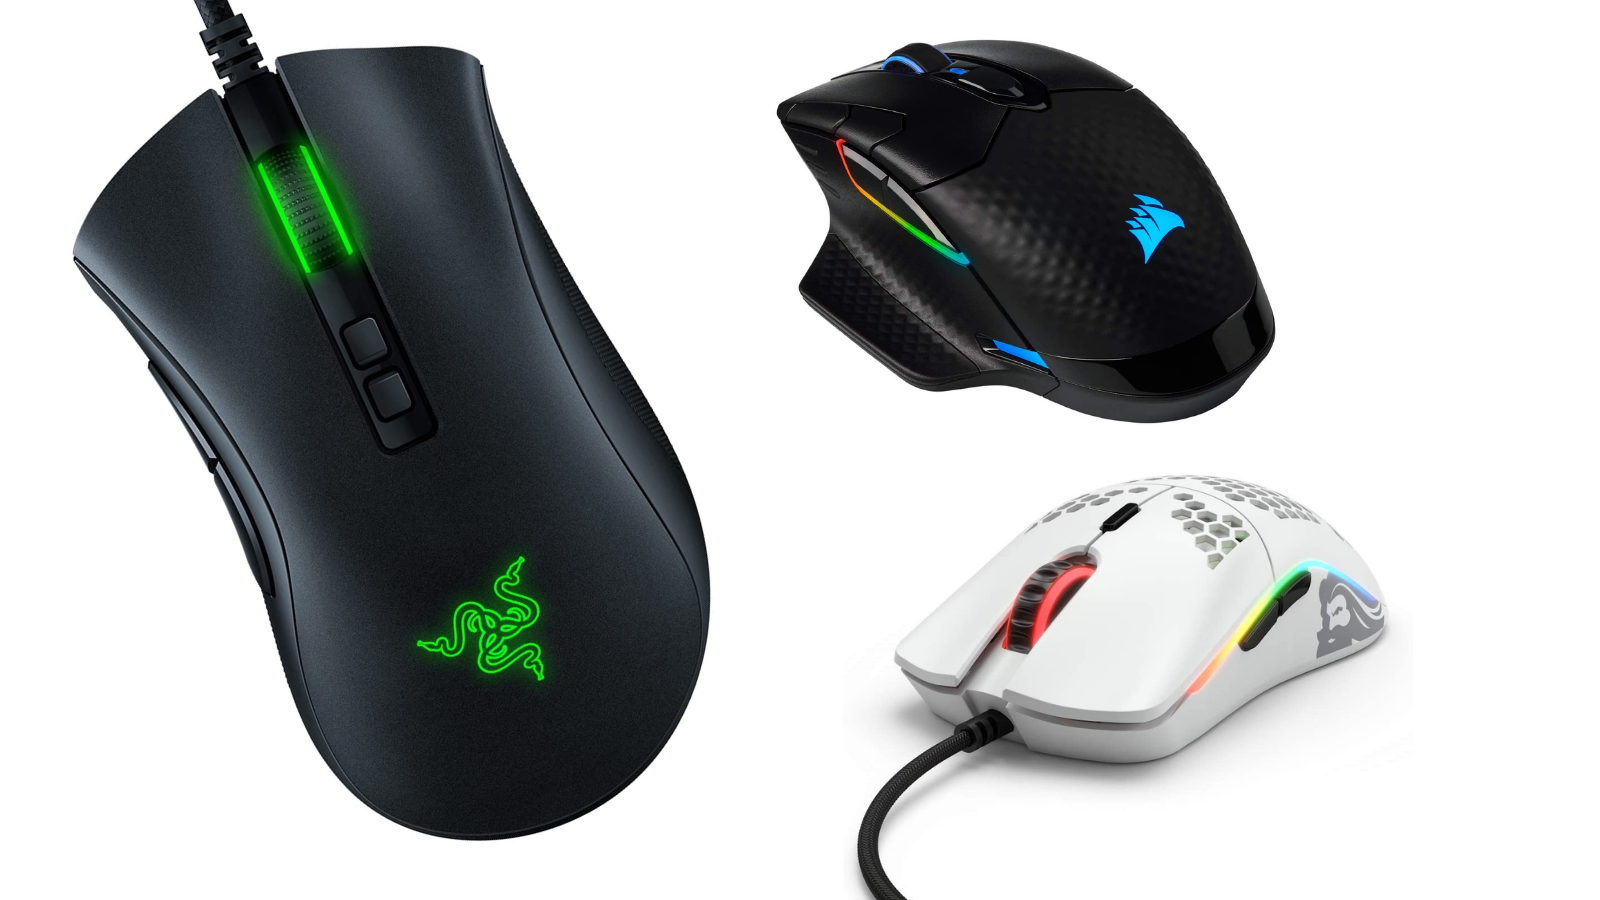 X game мышь. Gaming Mouse. Top Gaming Mouse. Cool Gaming Mouse. Bad Mouse игры.